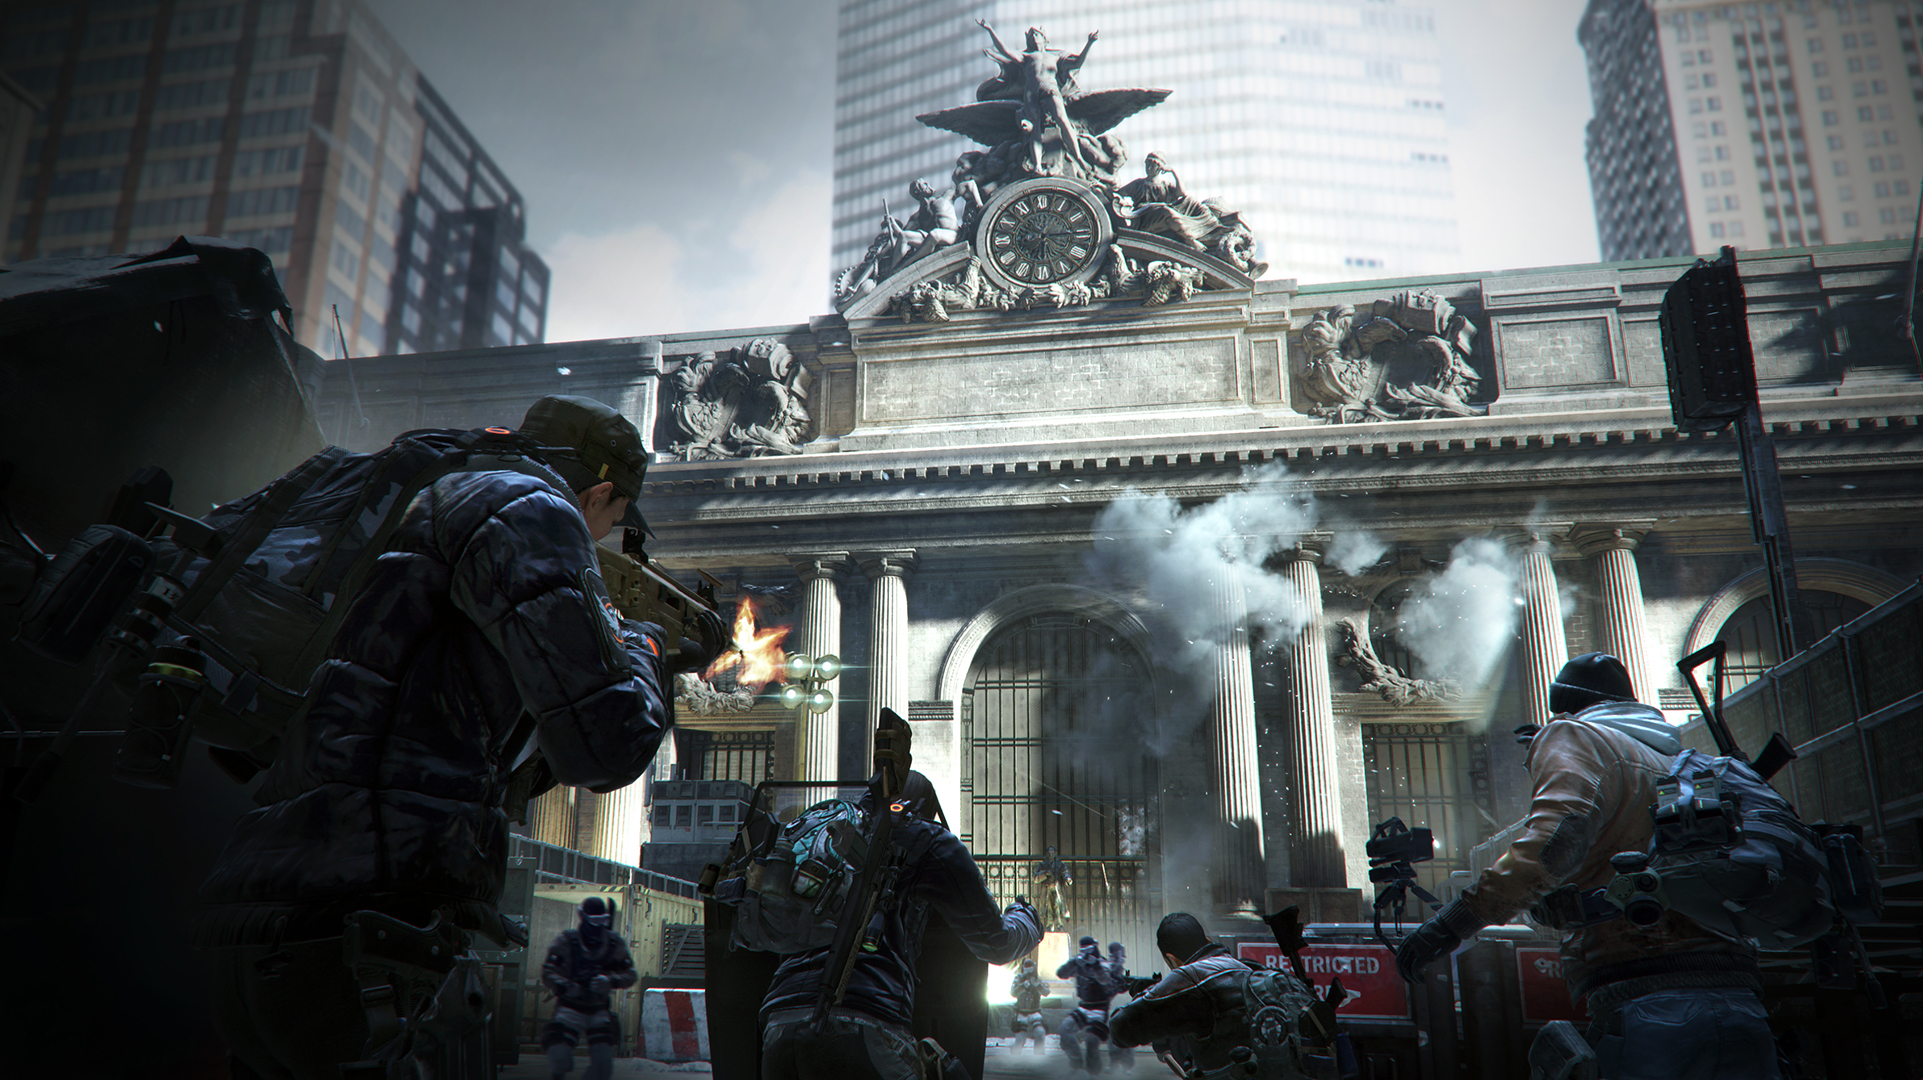 How to launch Tom Clancy's The Division on 2-core processor?